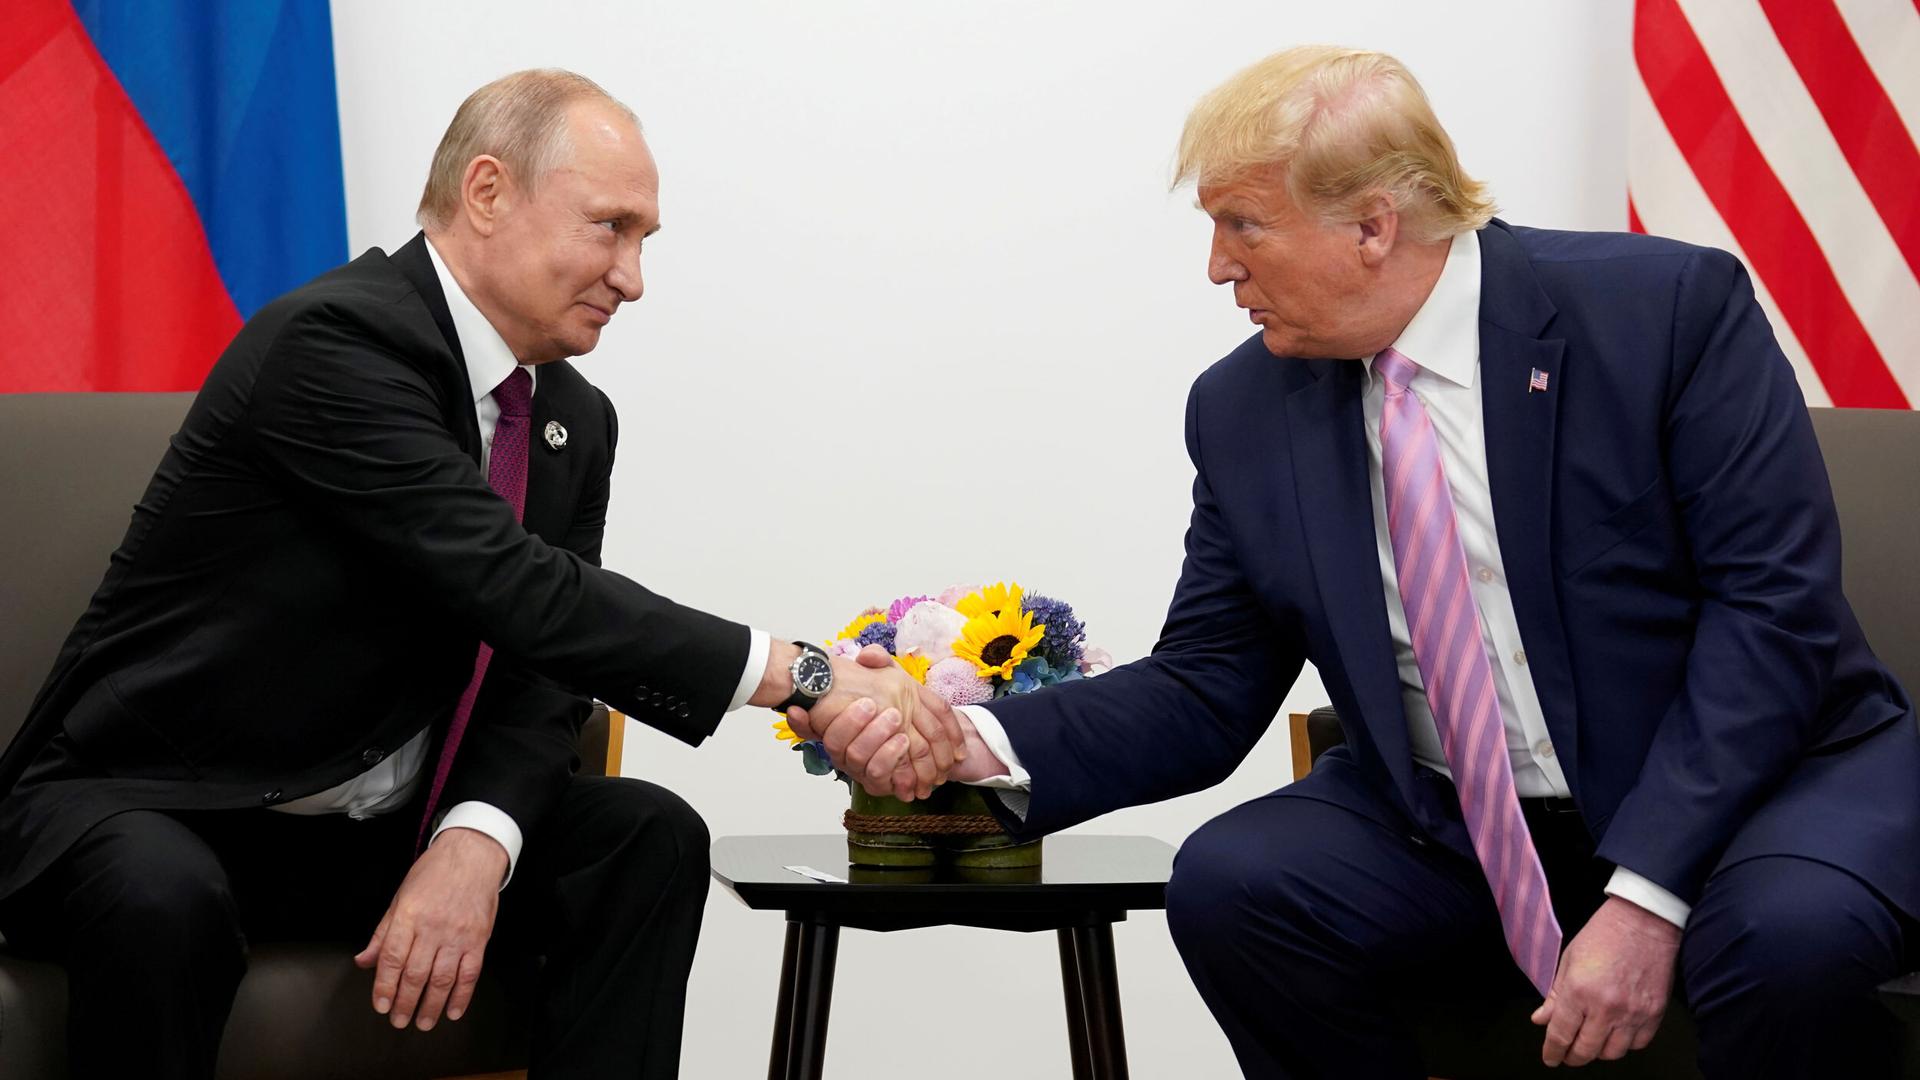 Russia’s President Vladimir Putin and US President Donald Trump are shown sitting in arm chairs and leaning toward each other shaking hands.